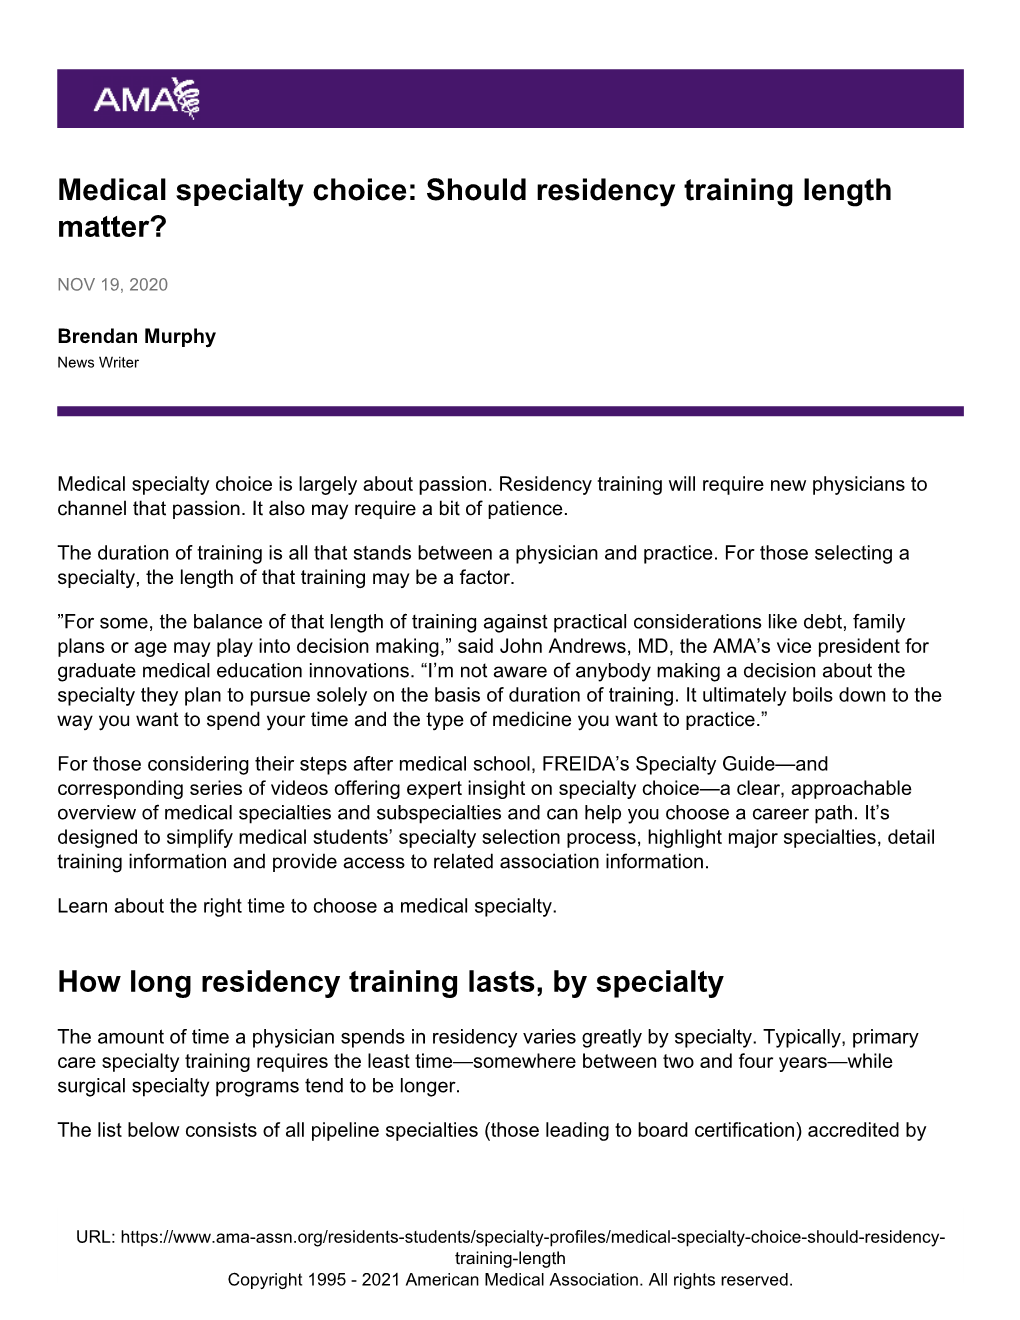 Medical Specialty Choice: Should Residency Training Length Matter?